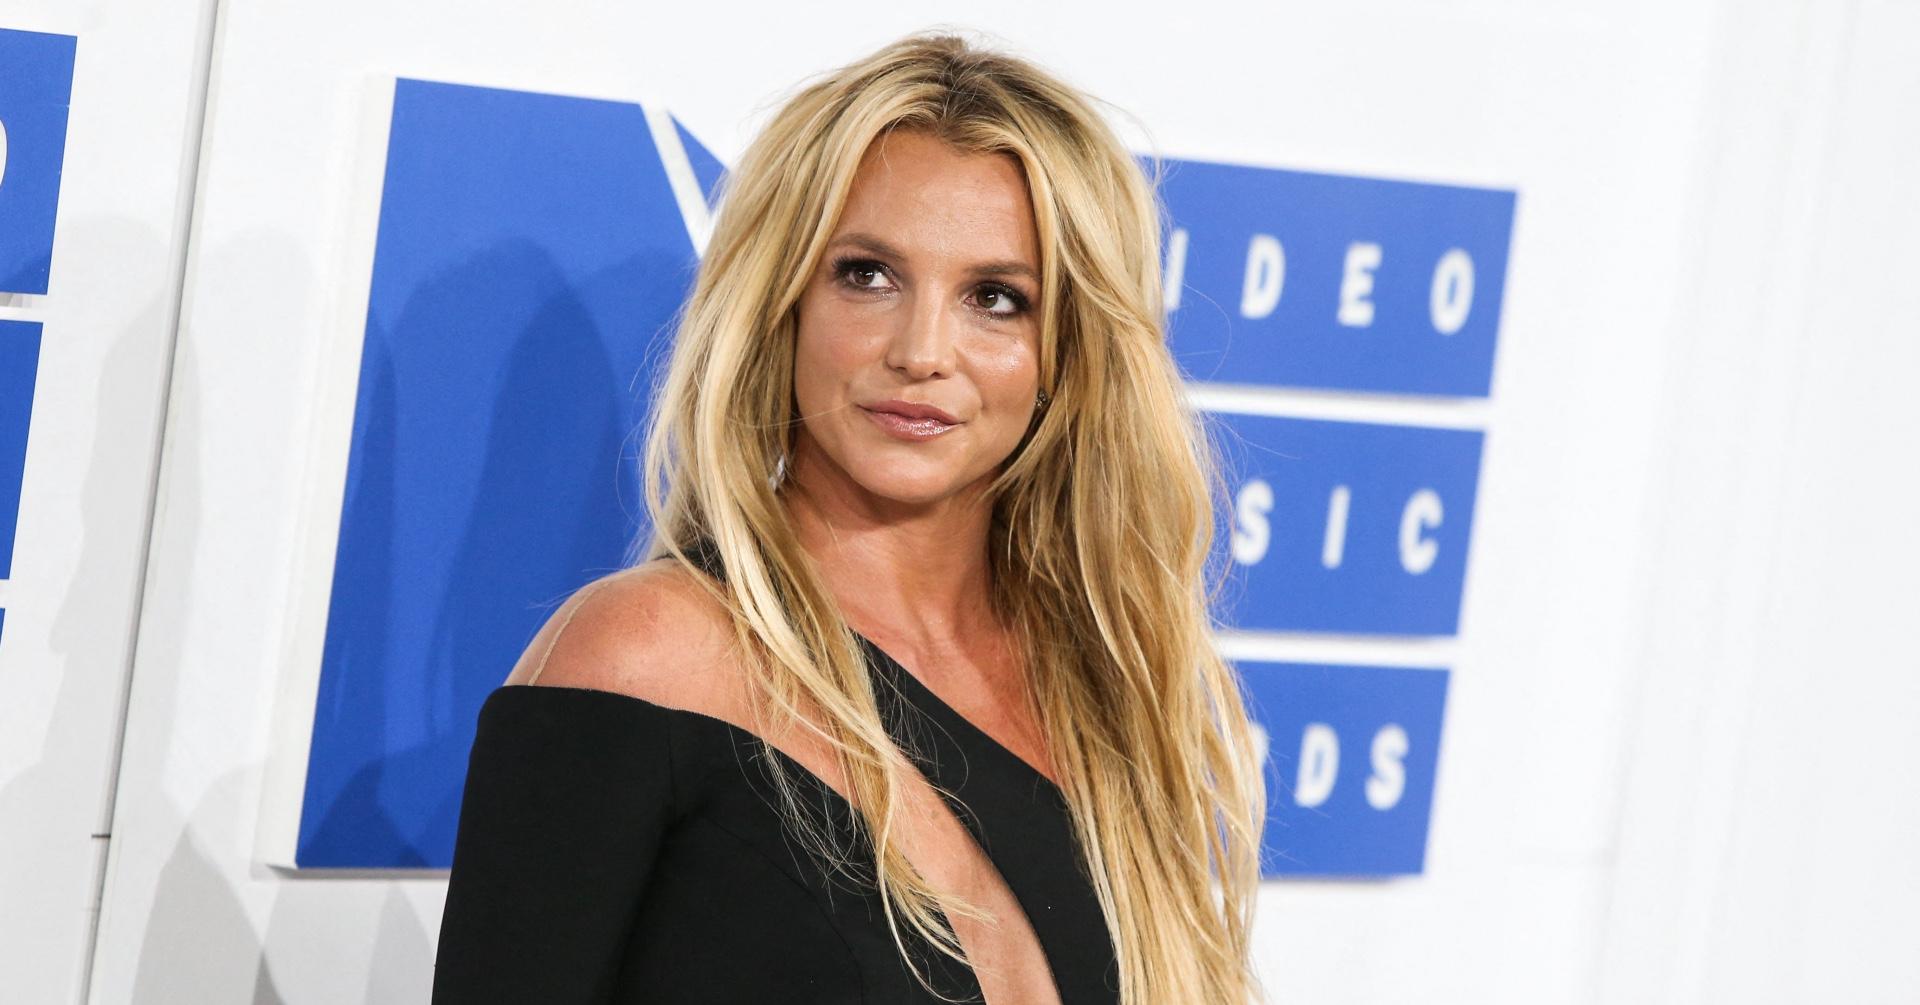 britney-spears-spotted-after-woman-in-me-memoir-revelations